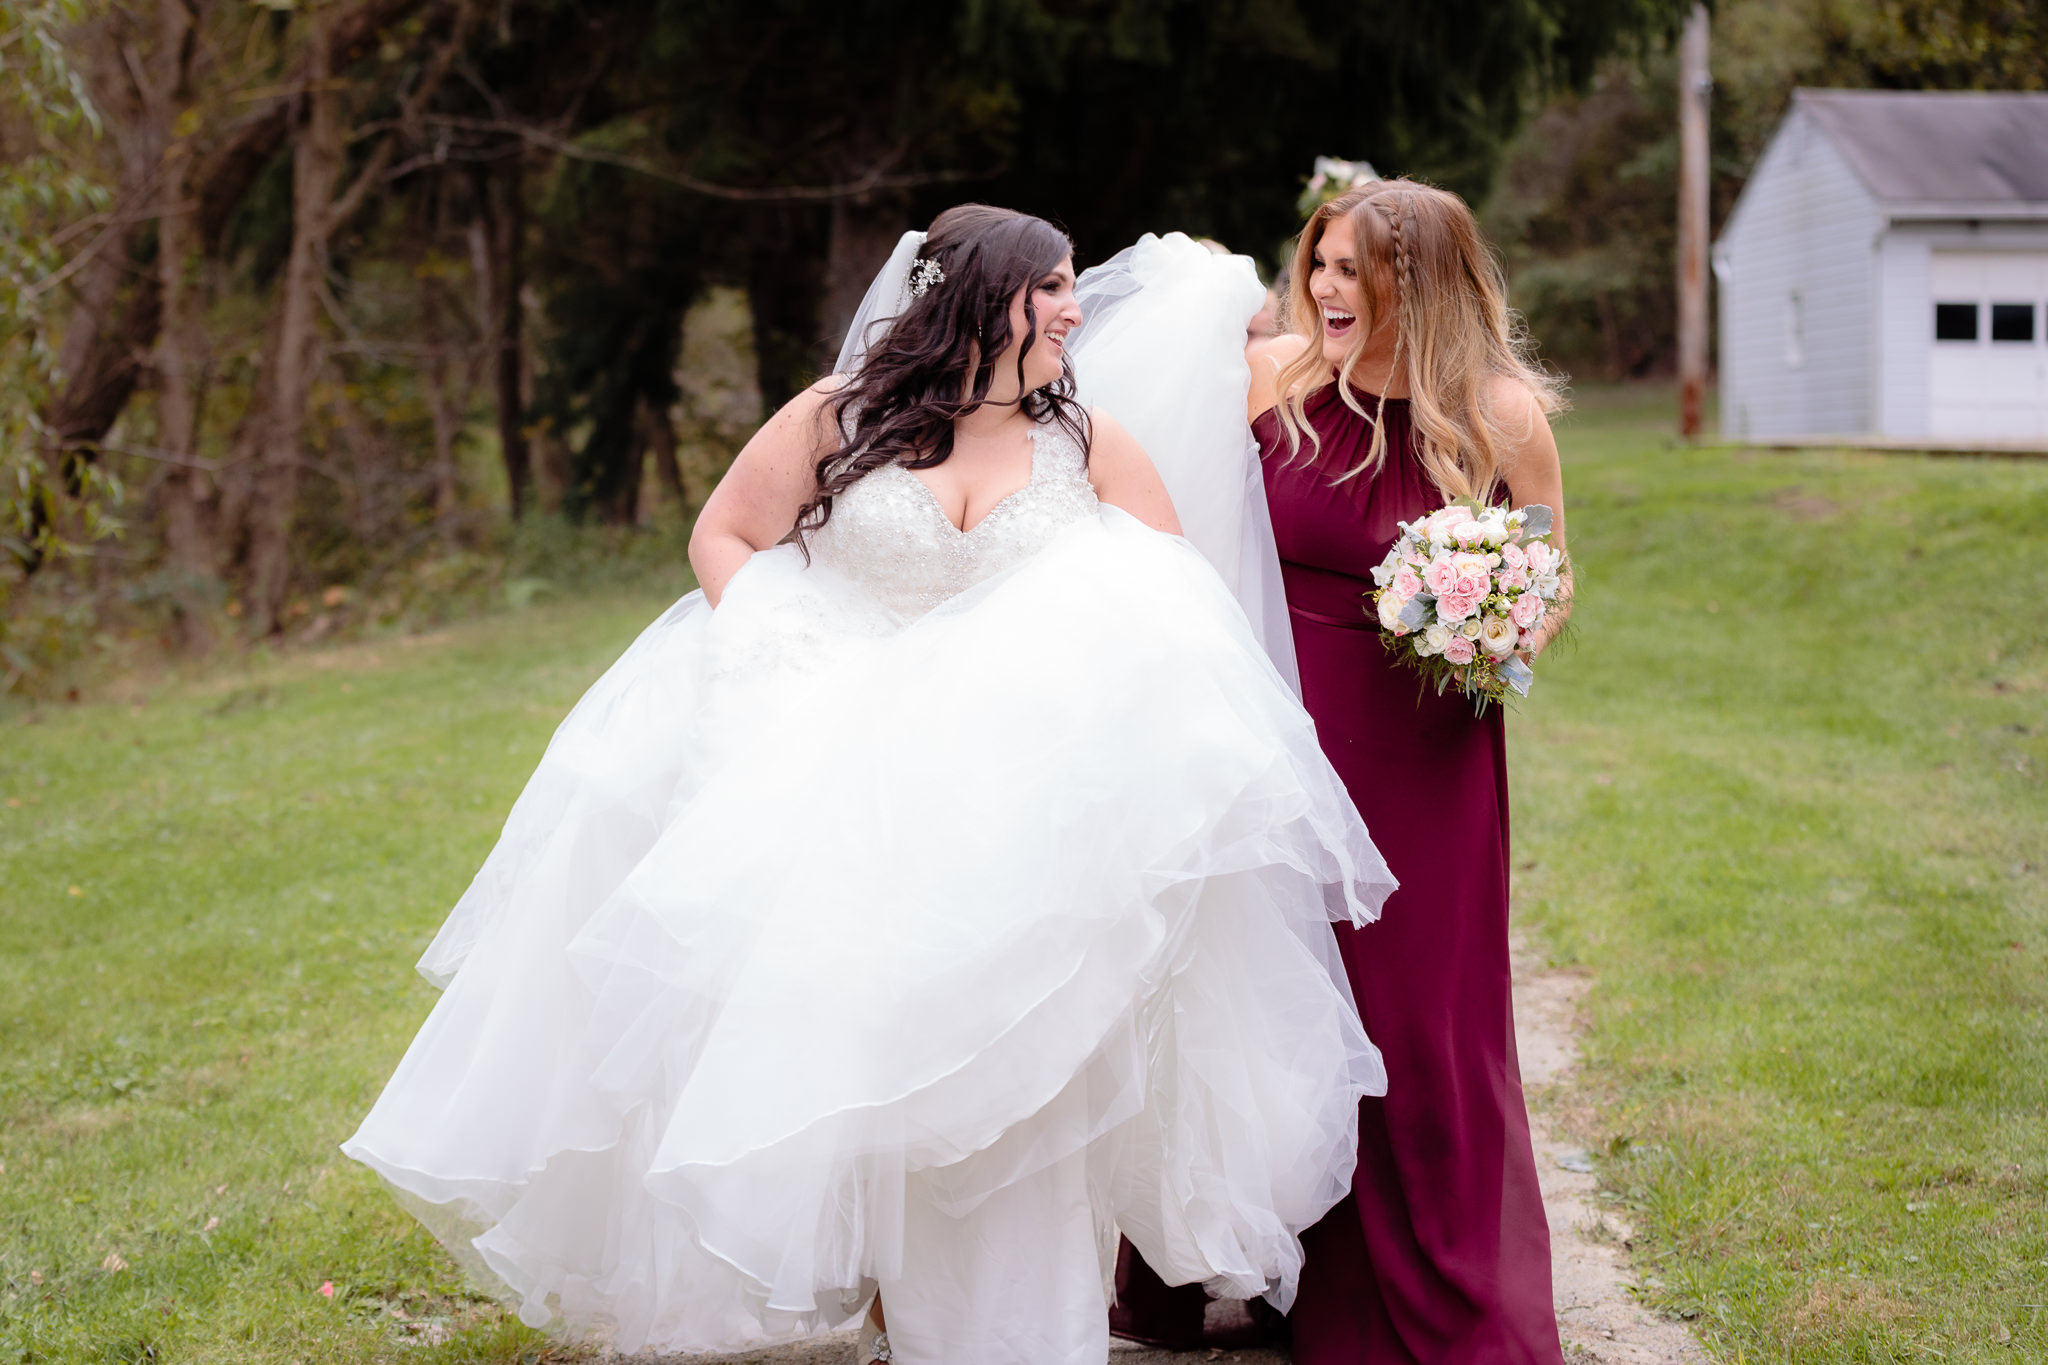 Bridesmaid helps the bride walk with her dress at Olson Park in Moon Township